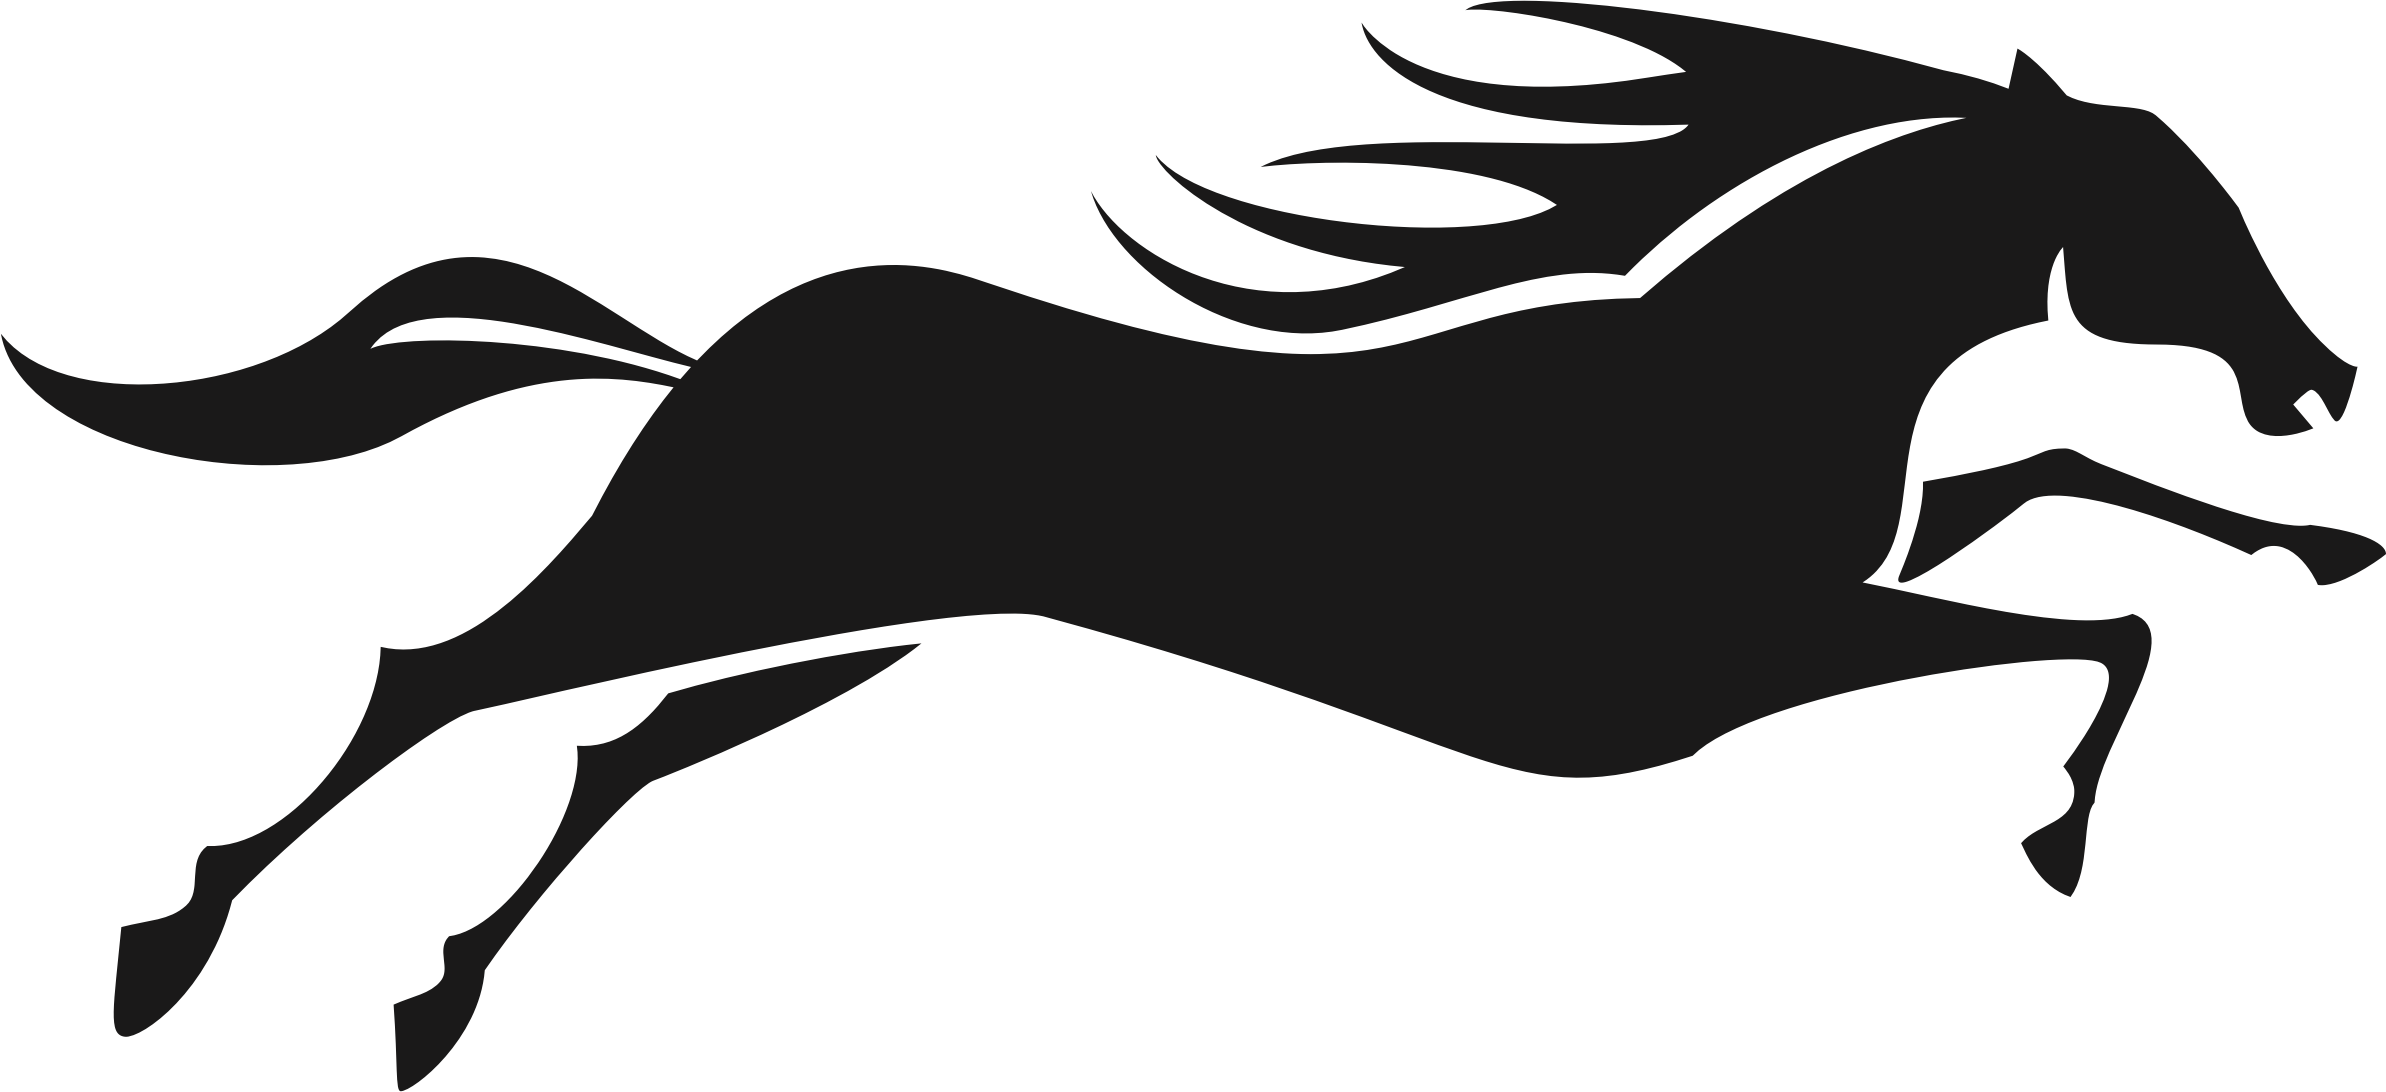 Horse Silhouette Clip art - horse png download - 2386*1092 - Free ...